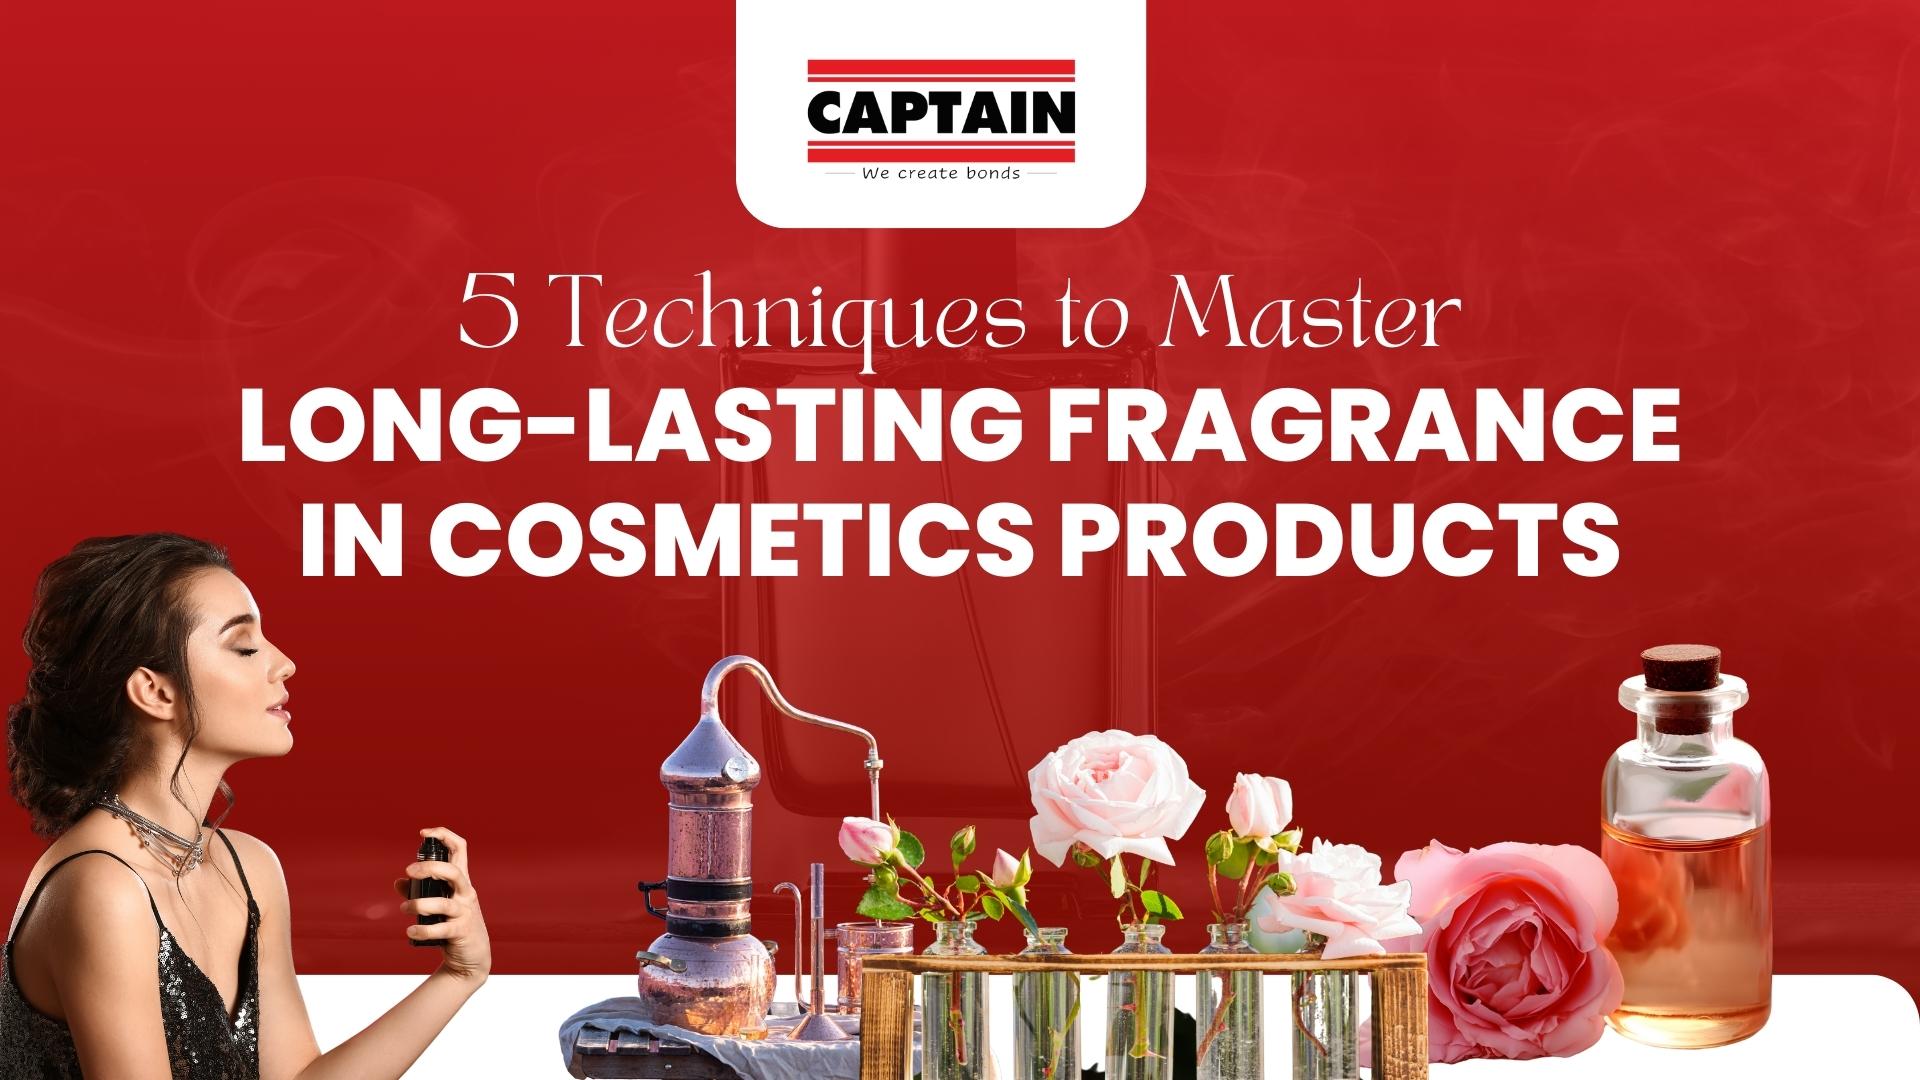 5 Techniques to Master Long-Lasting Fragrance